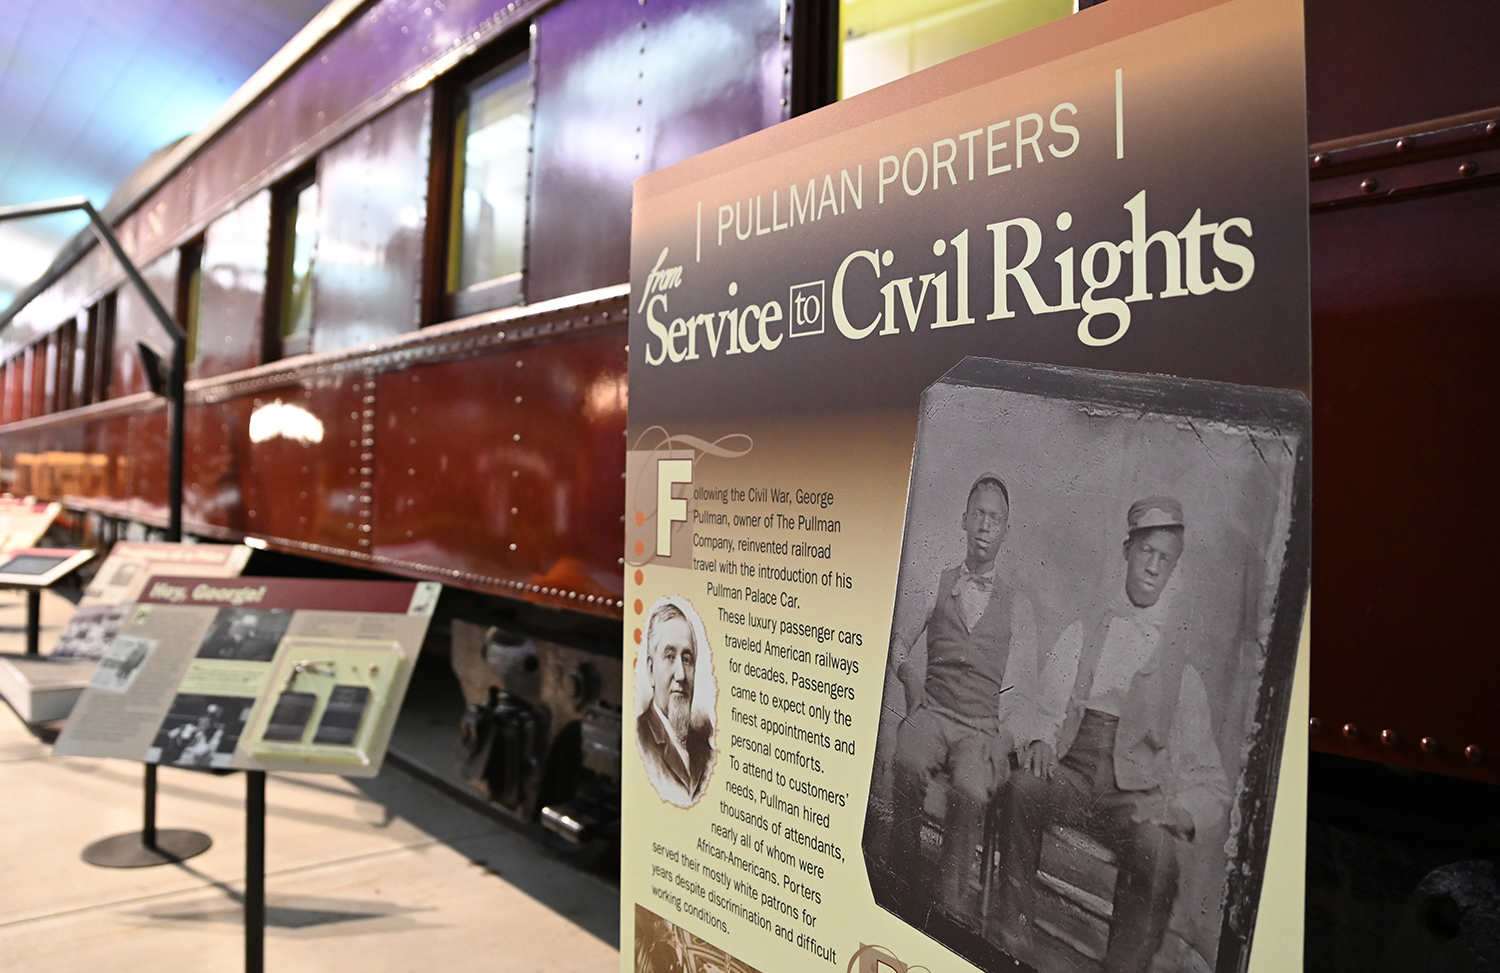 Pullman Porters: From Service to Civil Rights